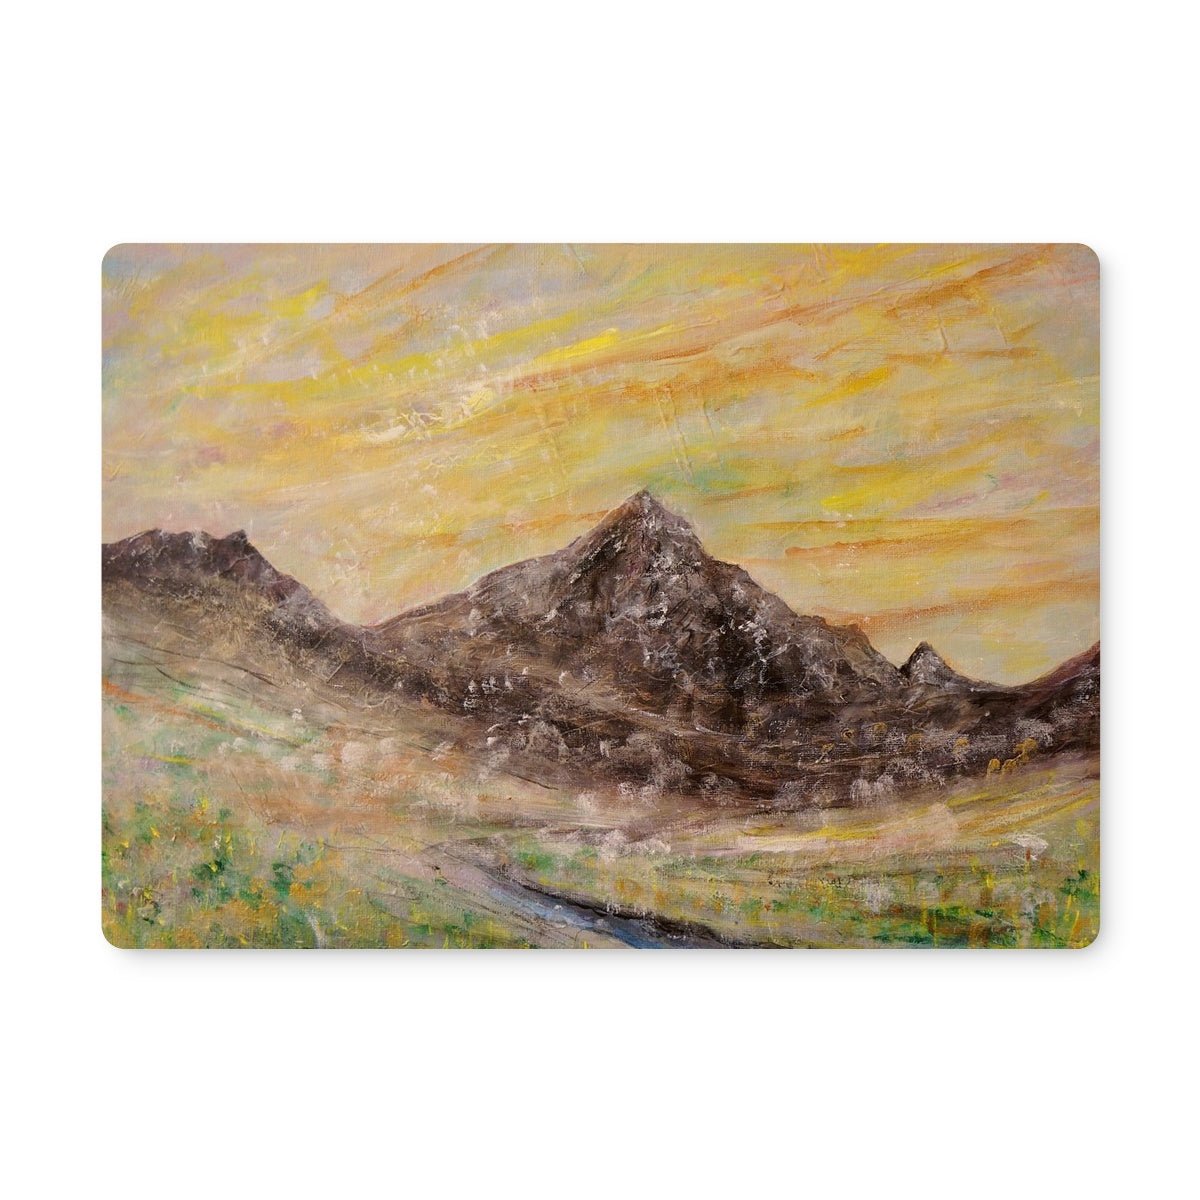 Glen Rosa Mist Arran Art Gifts Placemat-Placemats-Arran Art Gallery-Single Placemat-Paintings, Prints, Homeware, Art Gifts From Scotland By Scottish Artist Kevin Hunter